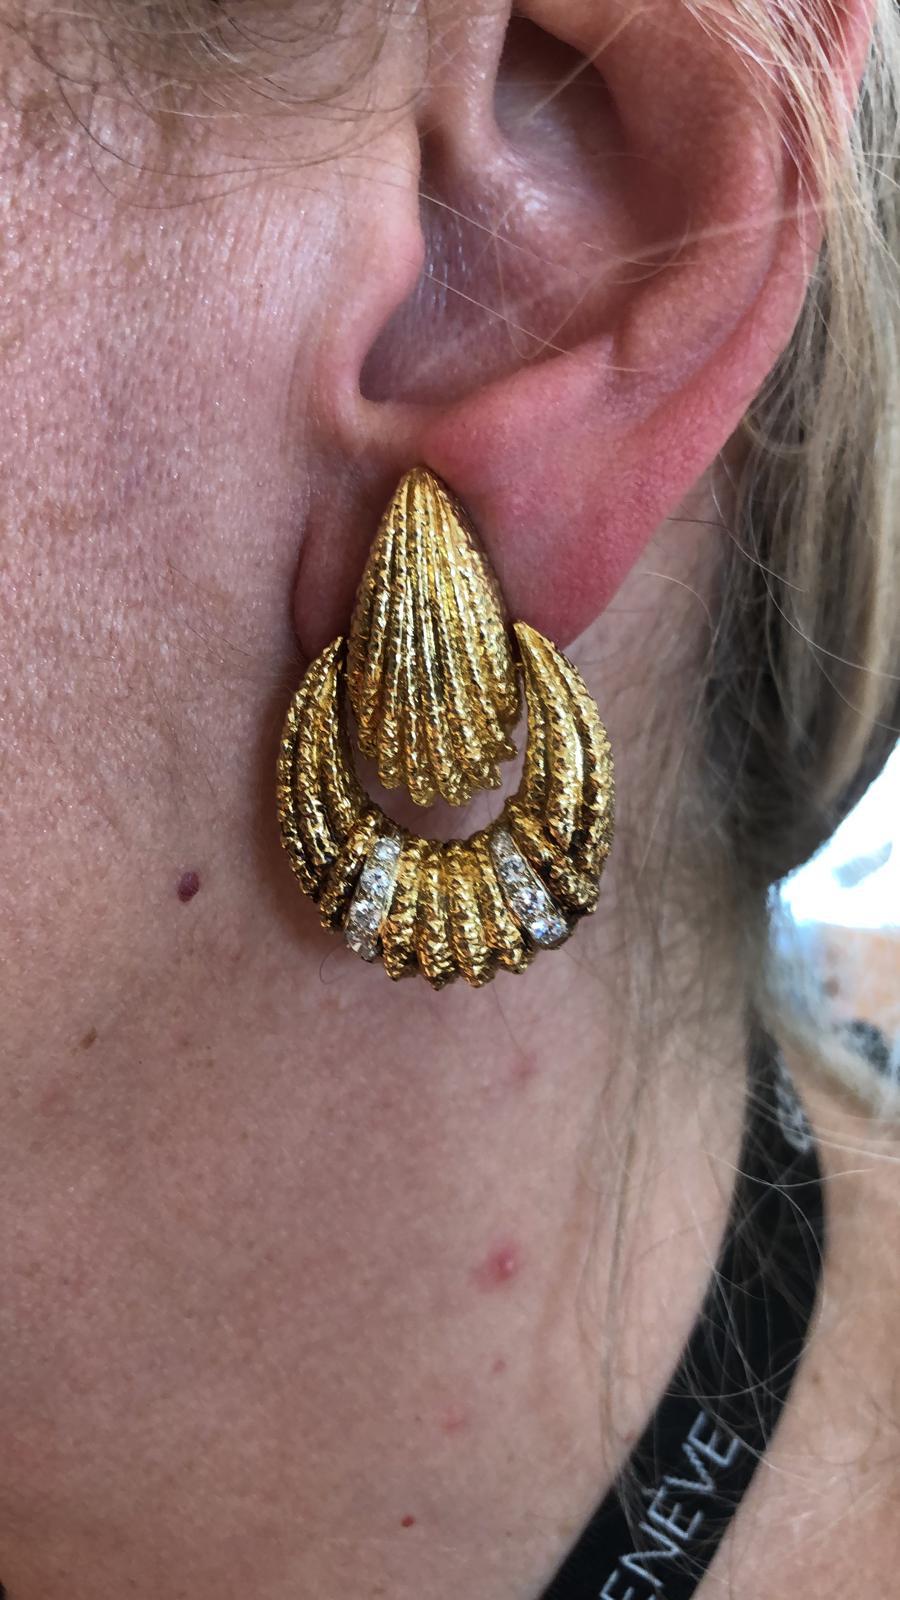 Van Cleef & Arpels Vintage 1970s Hammered Gold Diamond Door Knocker Earrings
Intricately crafted Van Cleef & Arpels earrings, comprised of textured 18k yellow gold with brilliant diamond accents, Signed Van Cleef & Arpels, vintage and estate